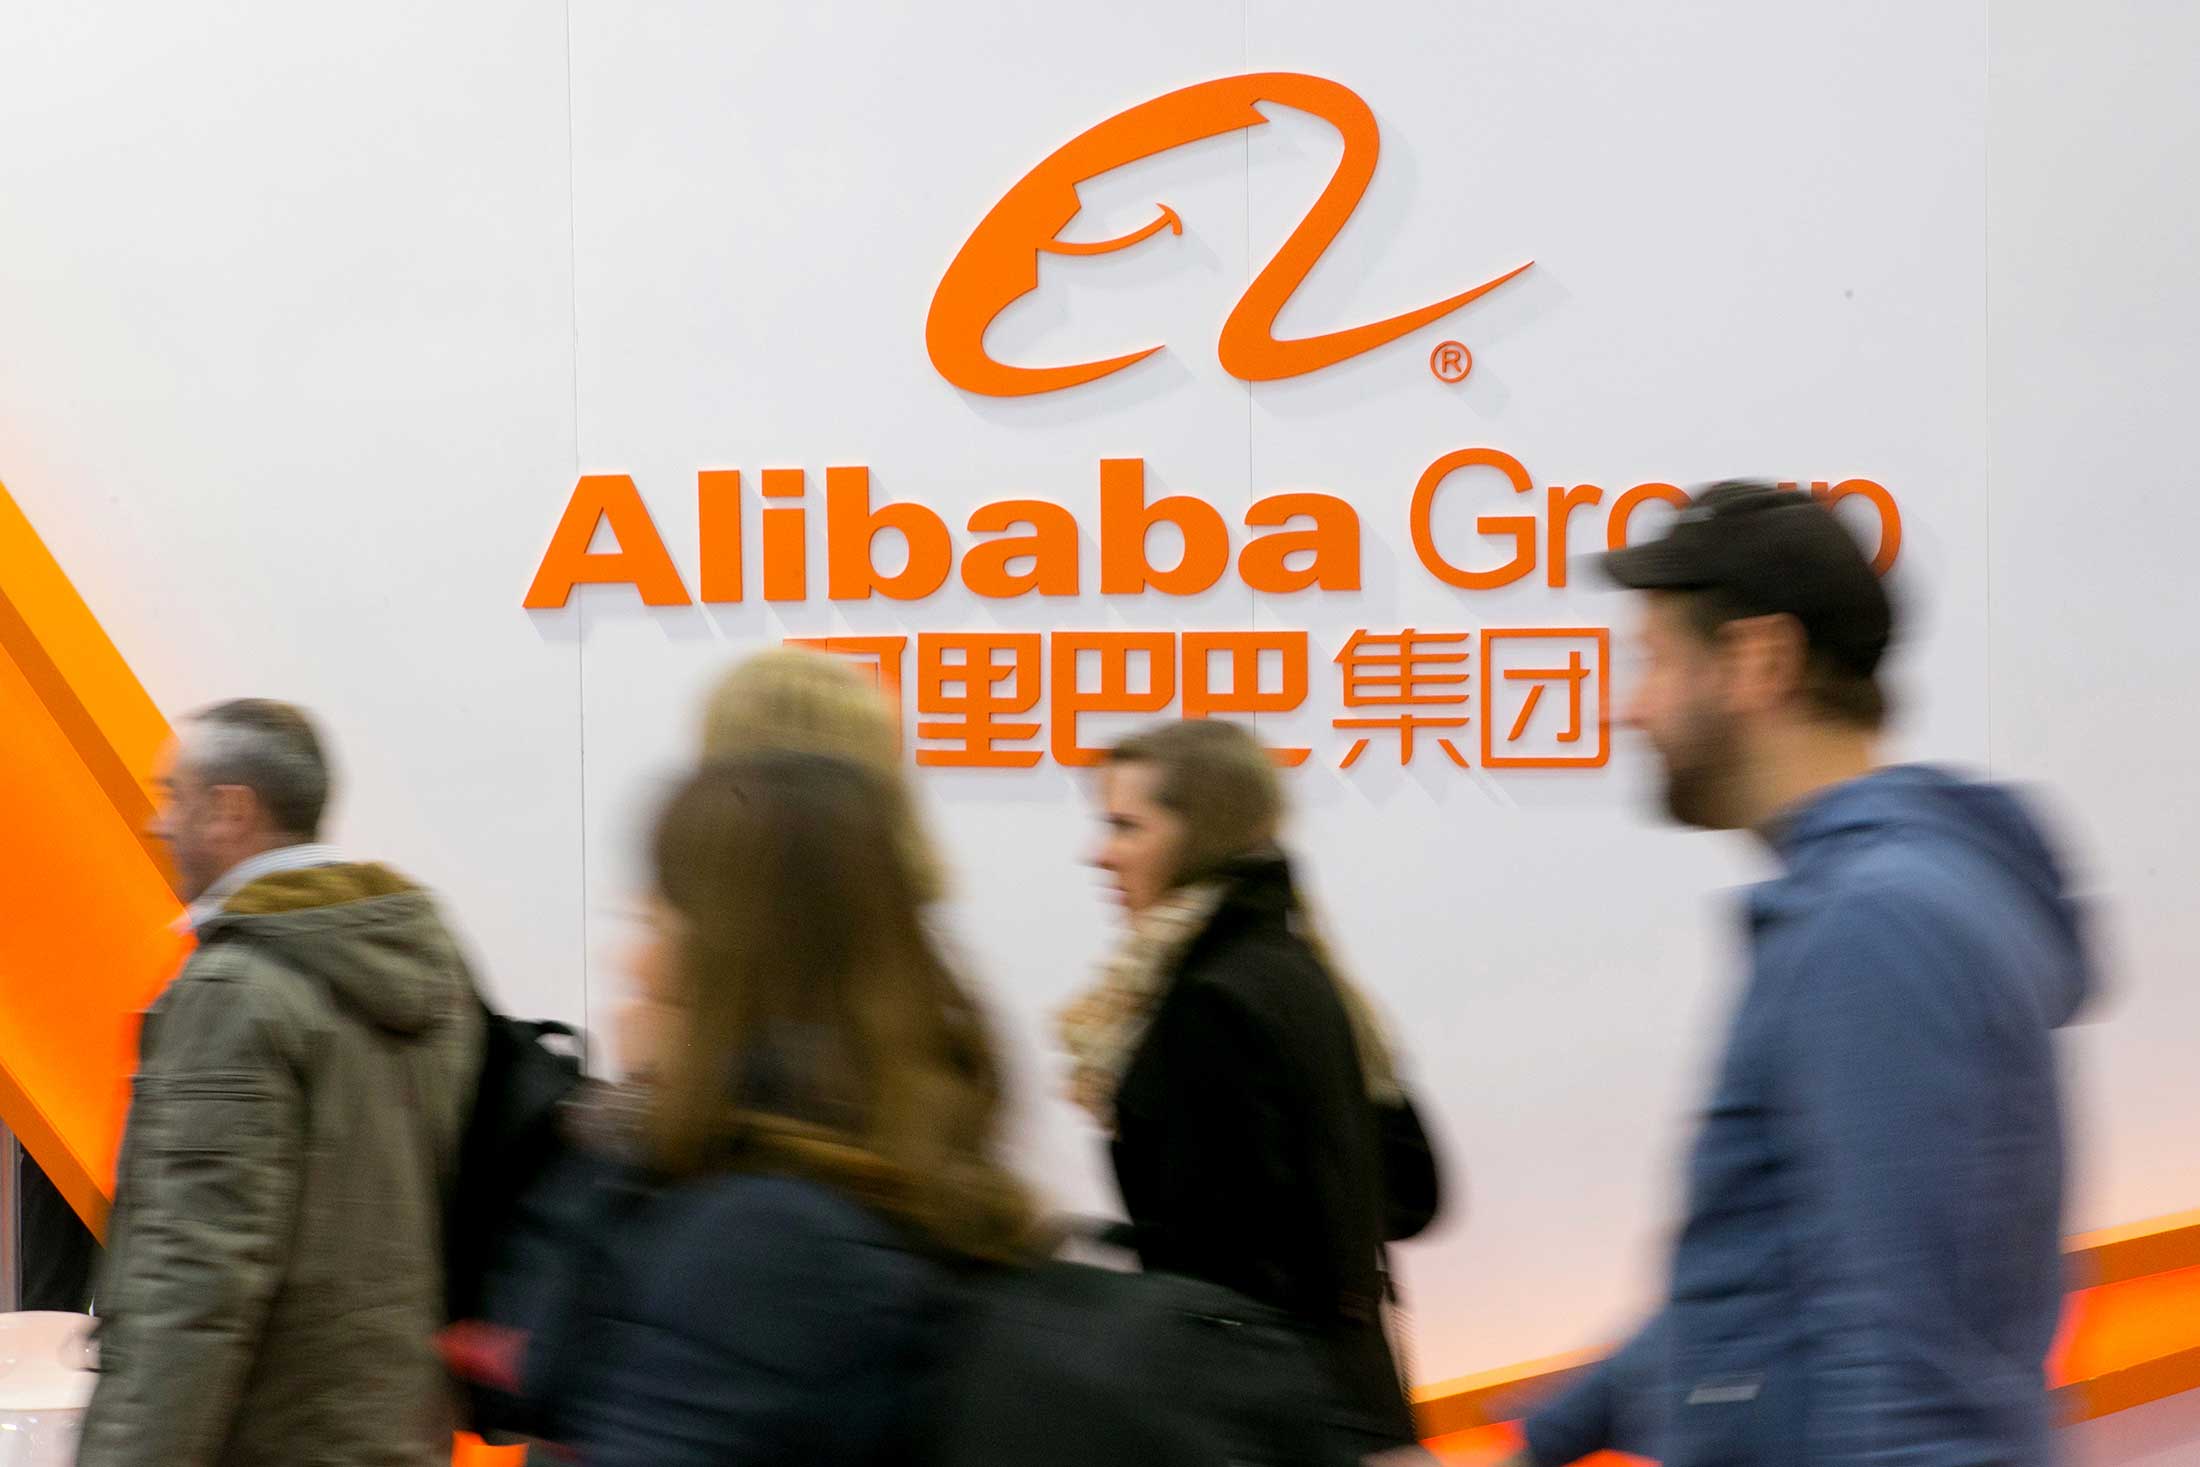 The Alibaba exhibition space at the CeBit tech show in Hannover, Germany, on March 16.
